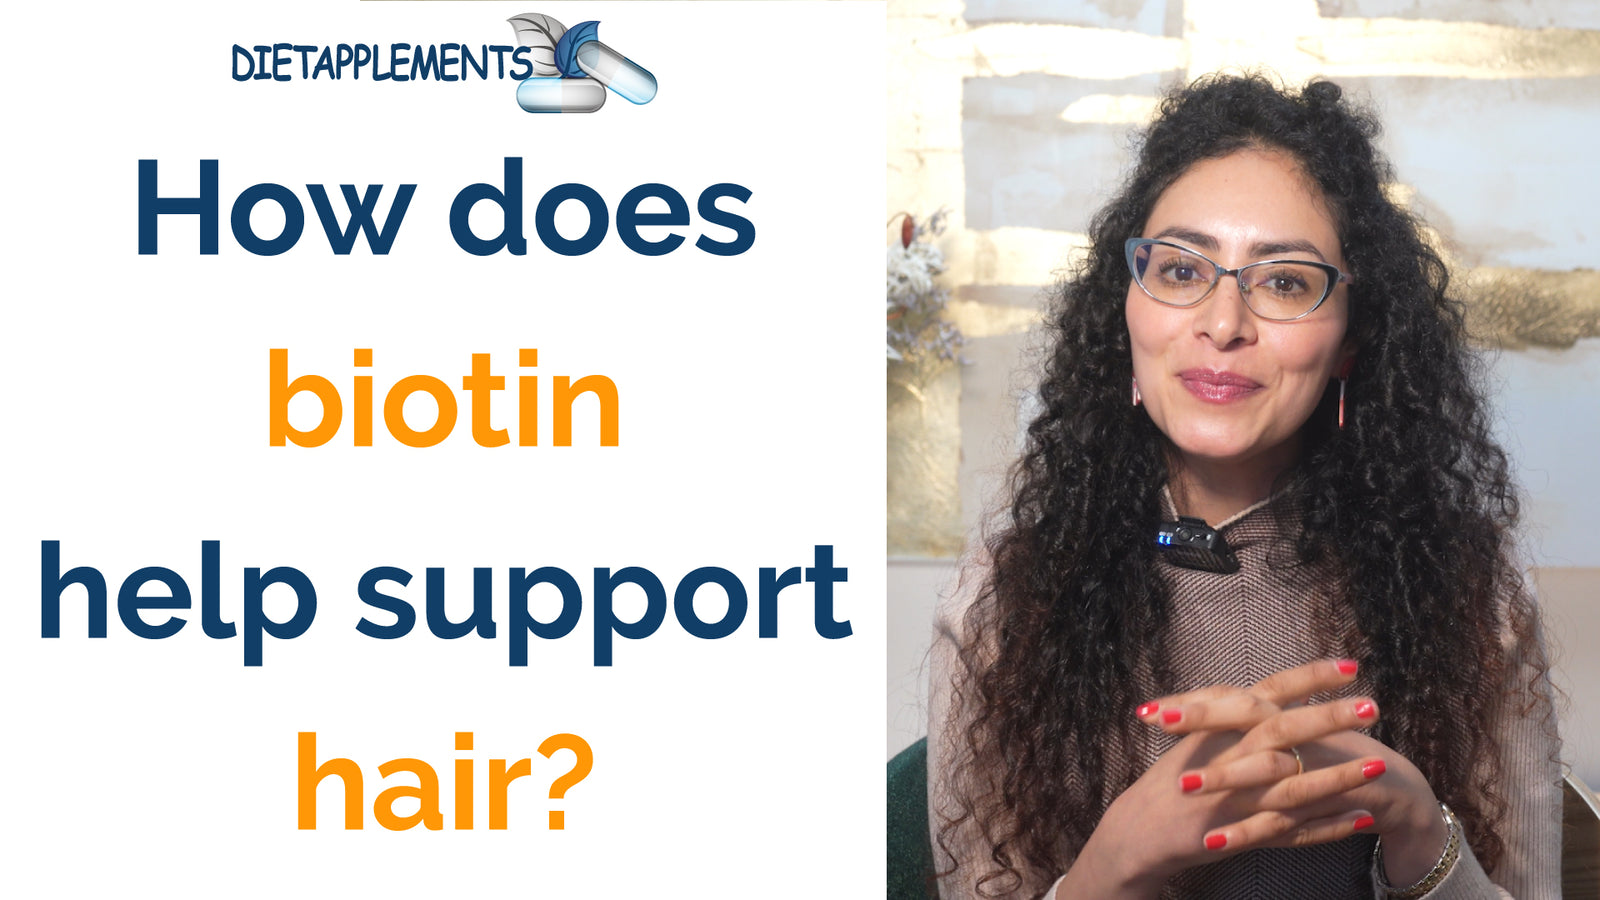 How does biotin help support hair?